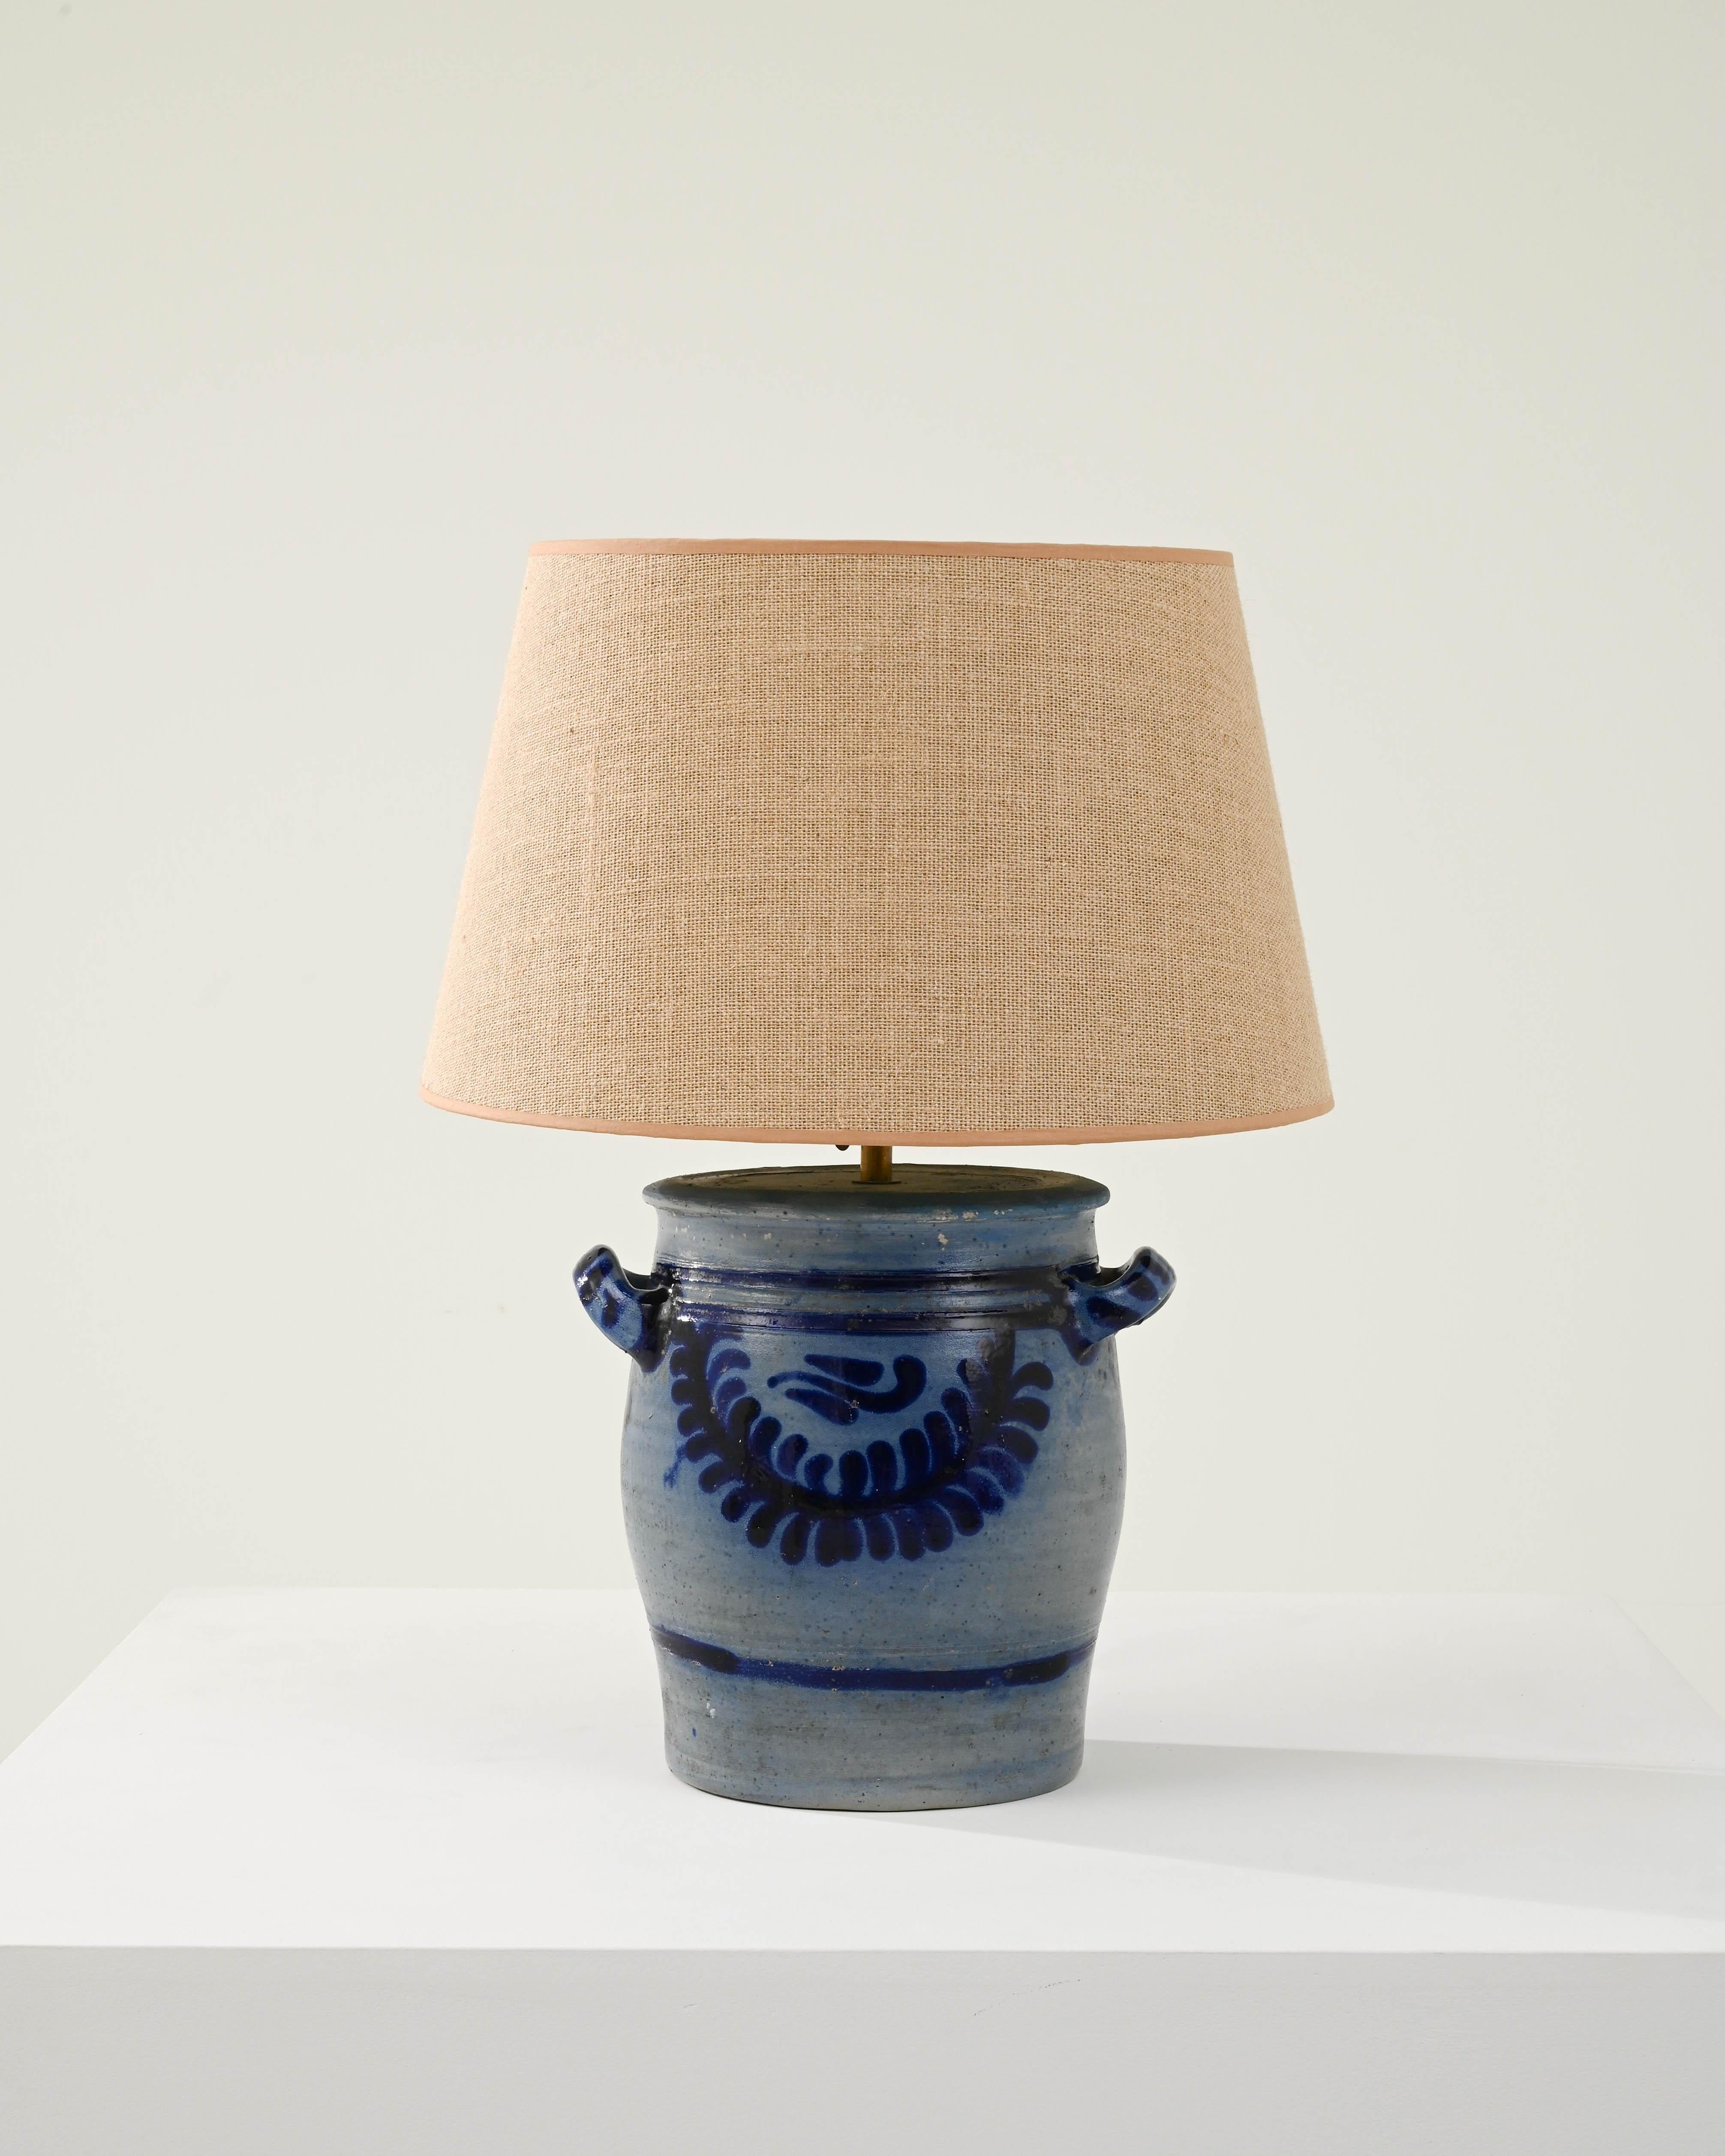 This eclectic-styled ceramic lamp comes from 1900s Belgium. The typical country pot is finished with a vivid blue salt glaze, appealing in its azure palette complemented with warm tones on its empire shade which also contrasts with its rounded clay